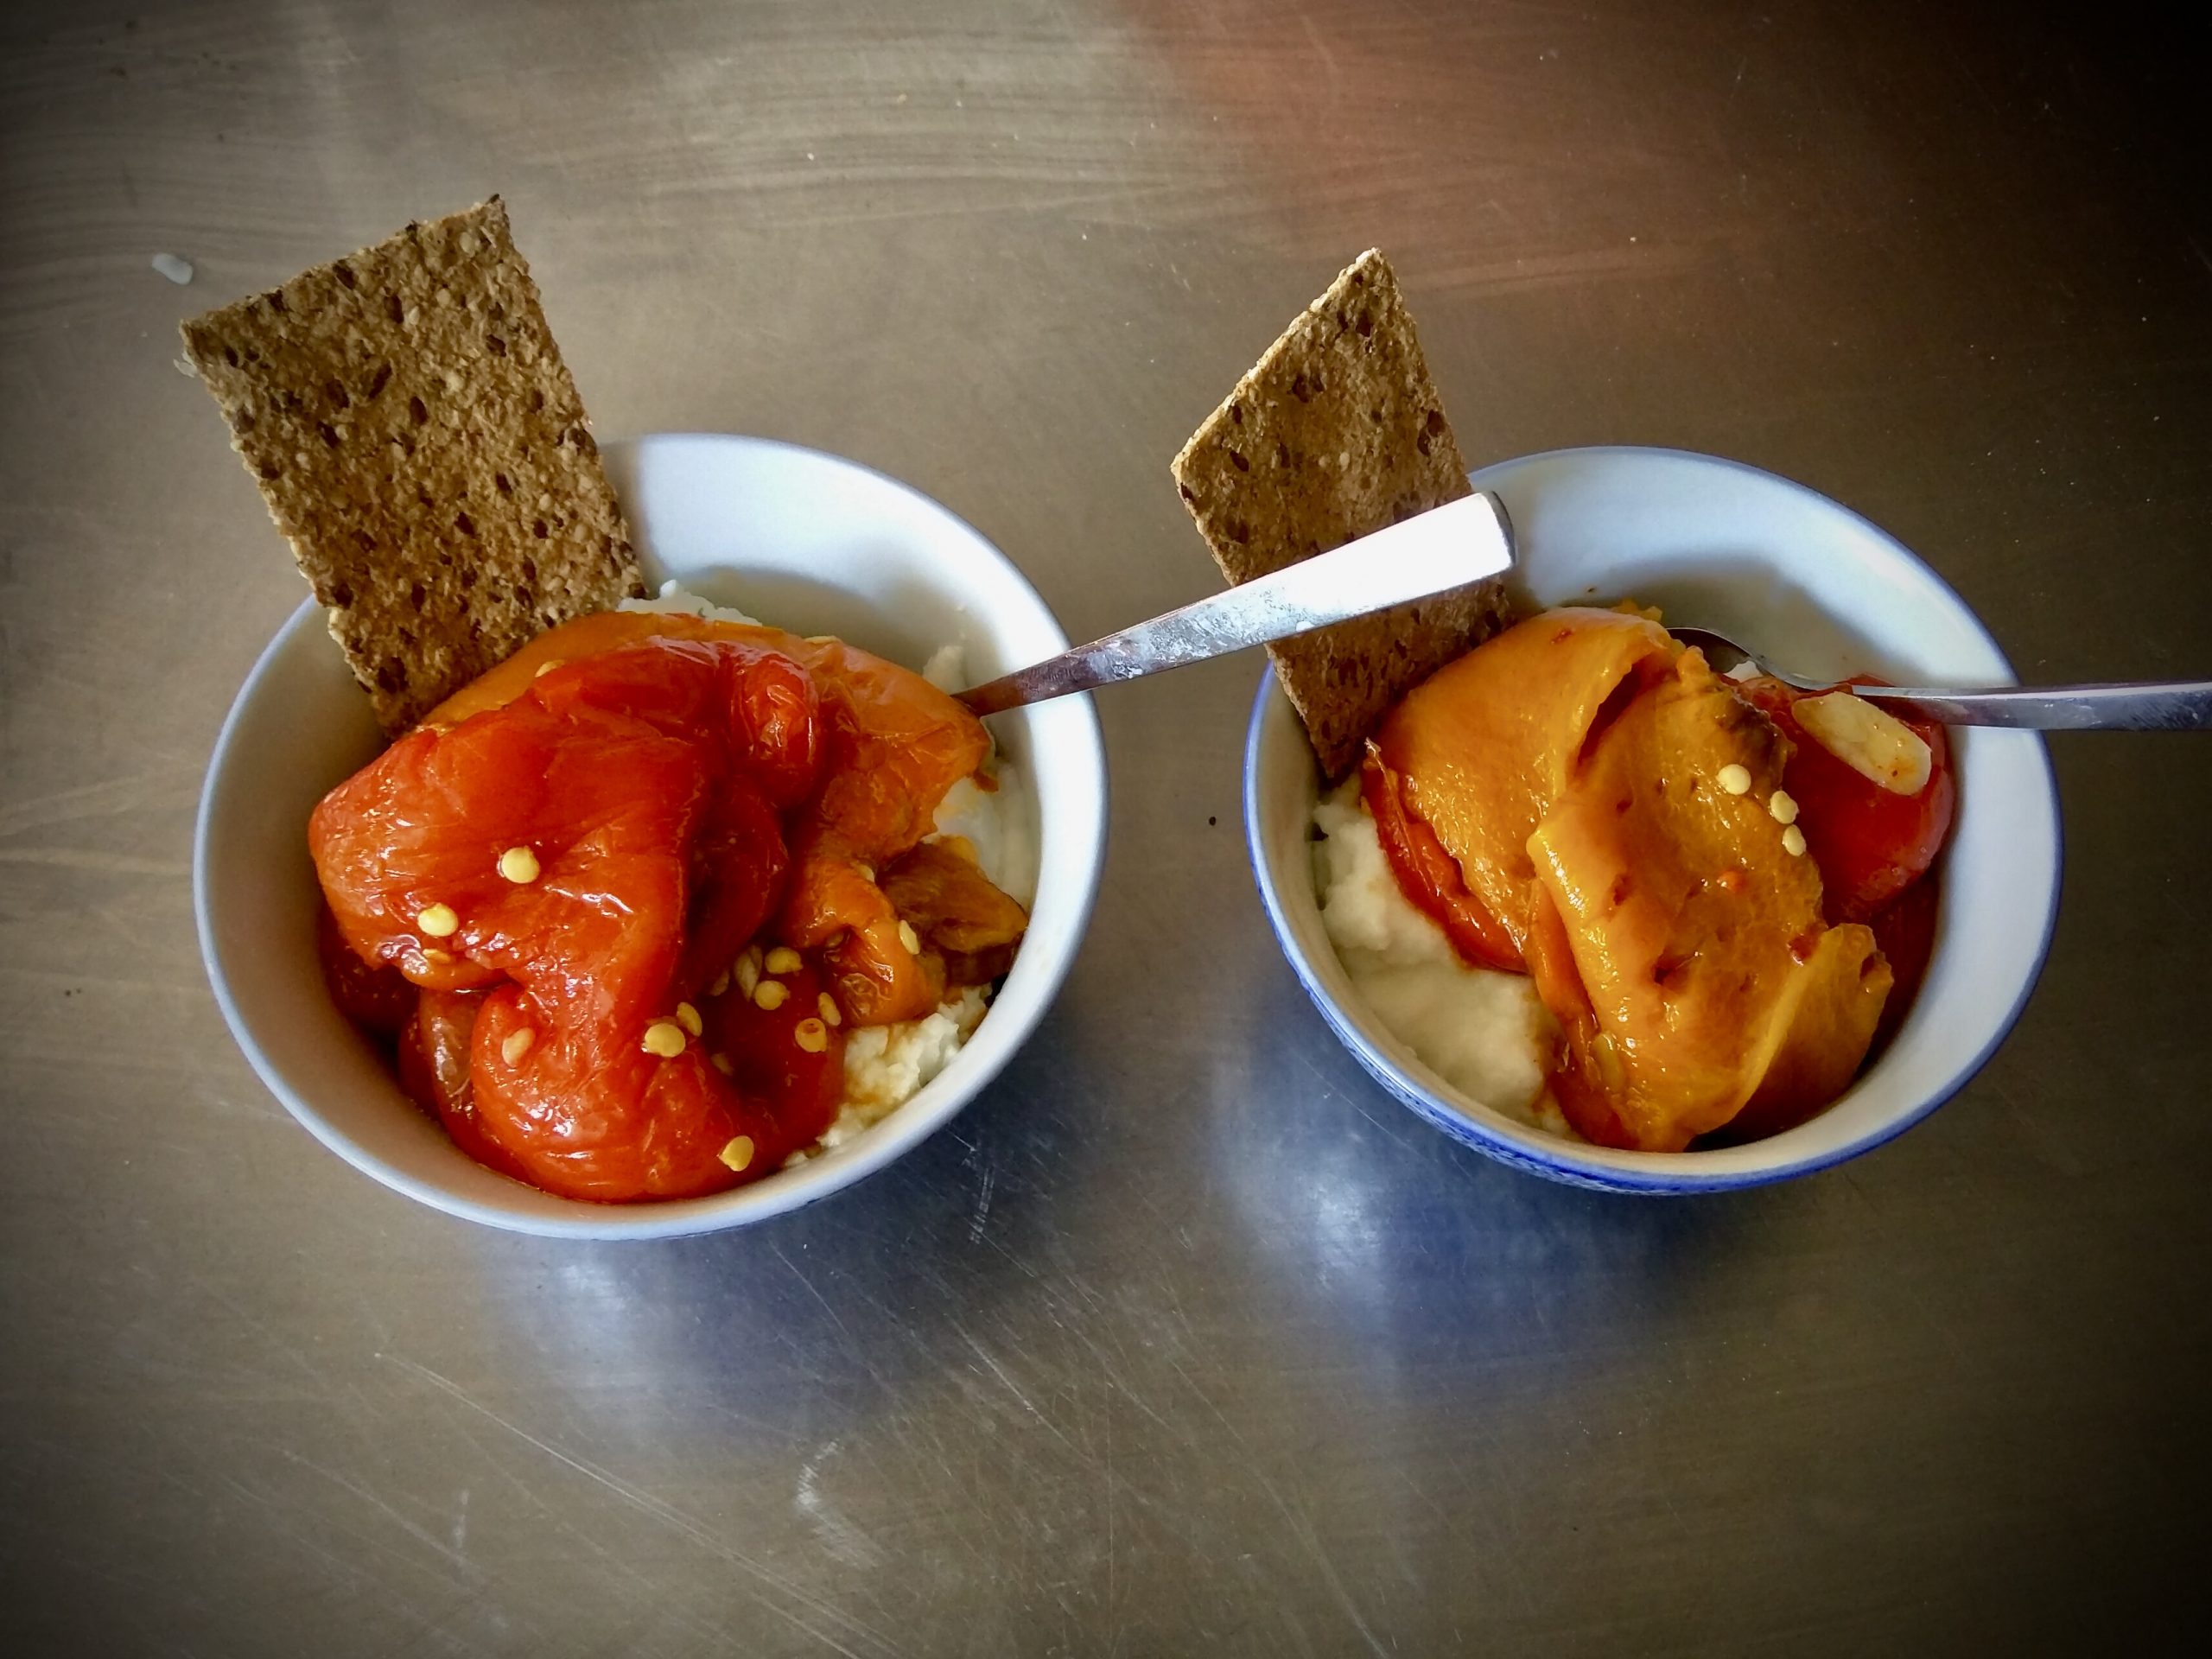 Breakfast: Roasted Peppers with Goat Yoghurt and Crackers